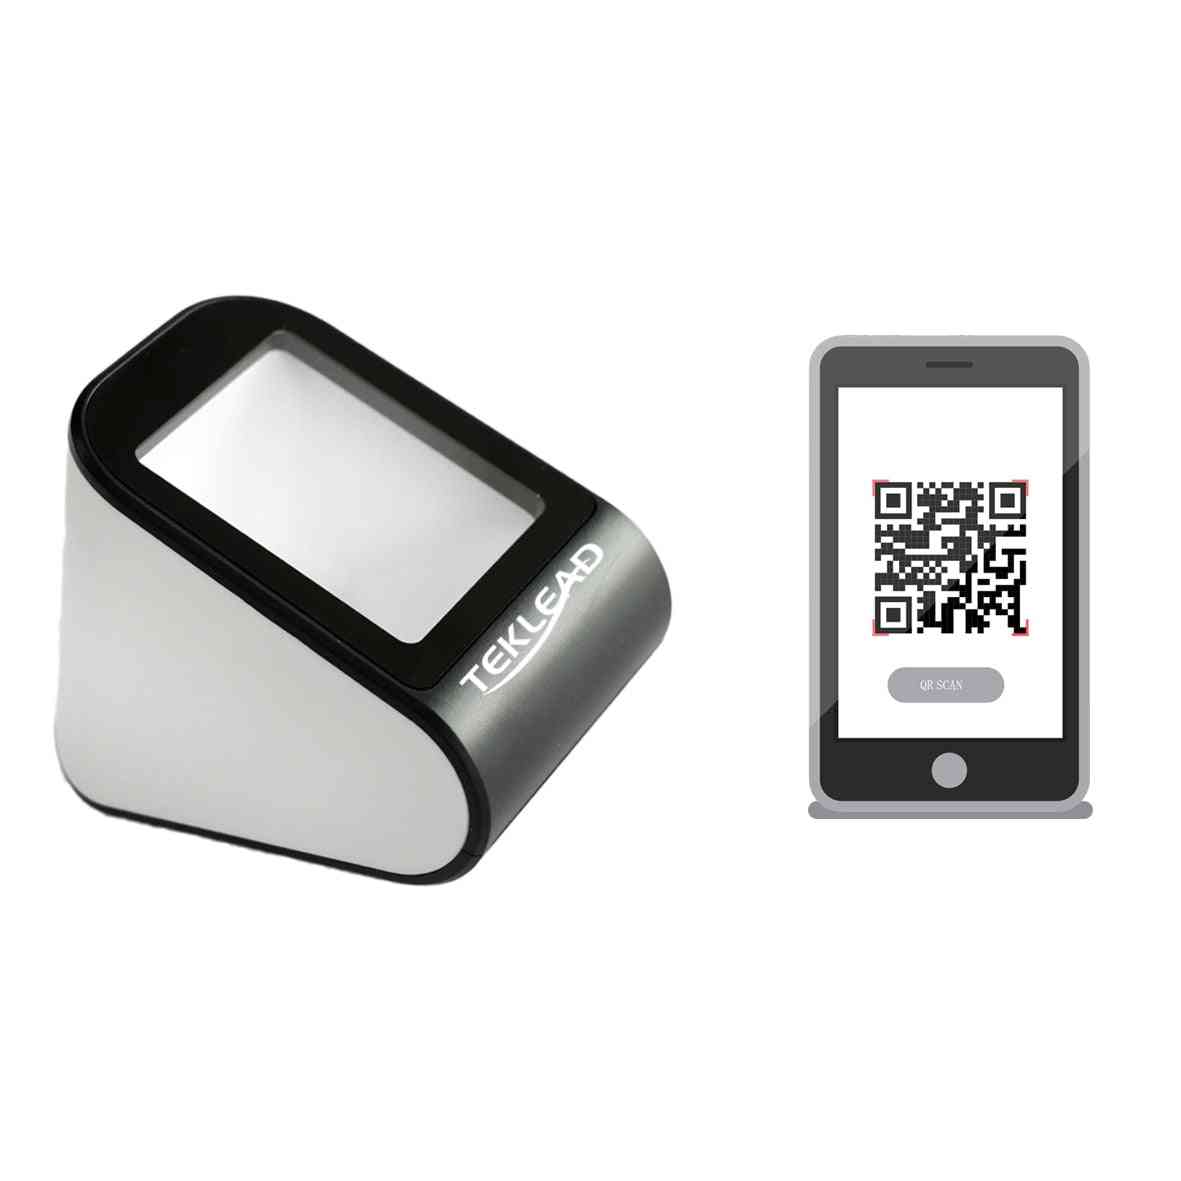 Qr Code Scanner For Mobile Phone E-ticket 1d/2d Barcode Reader Wired